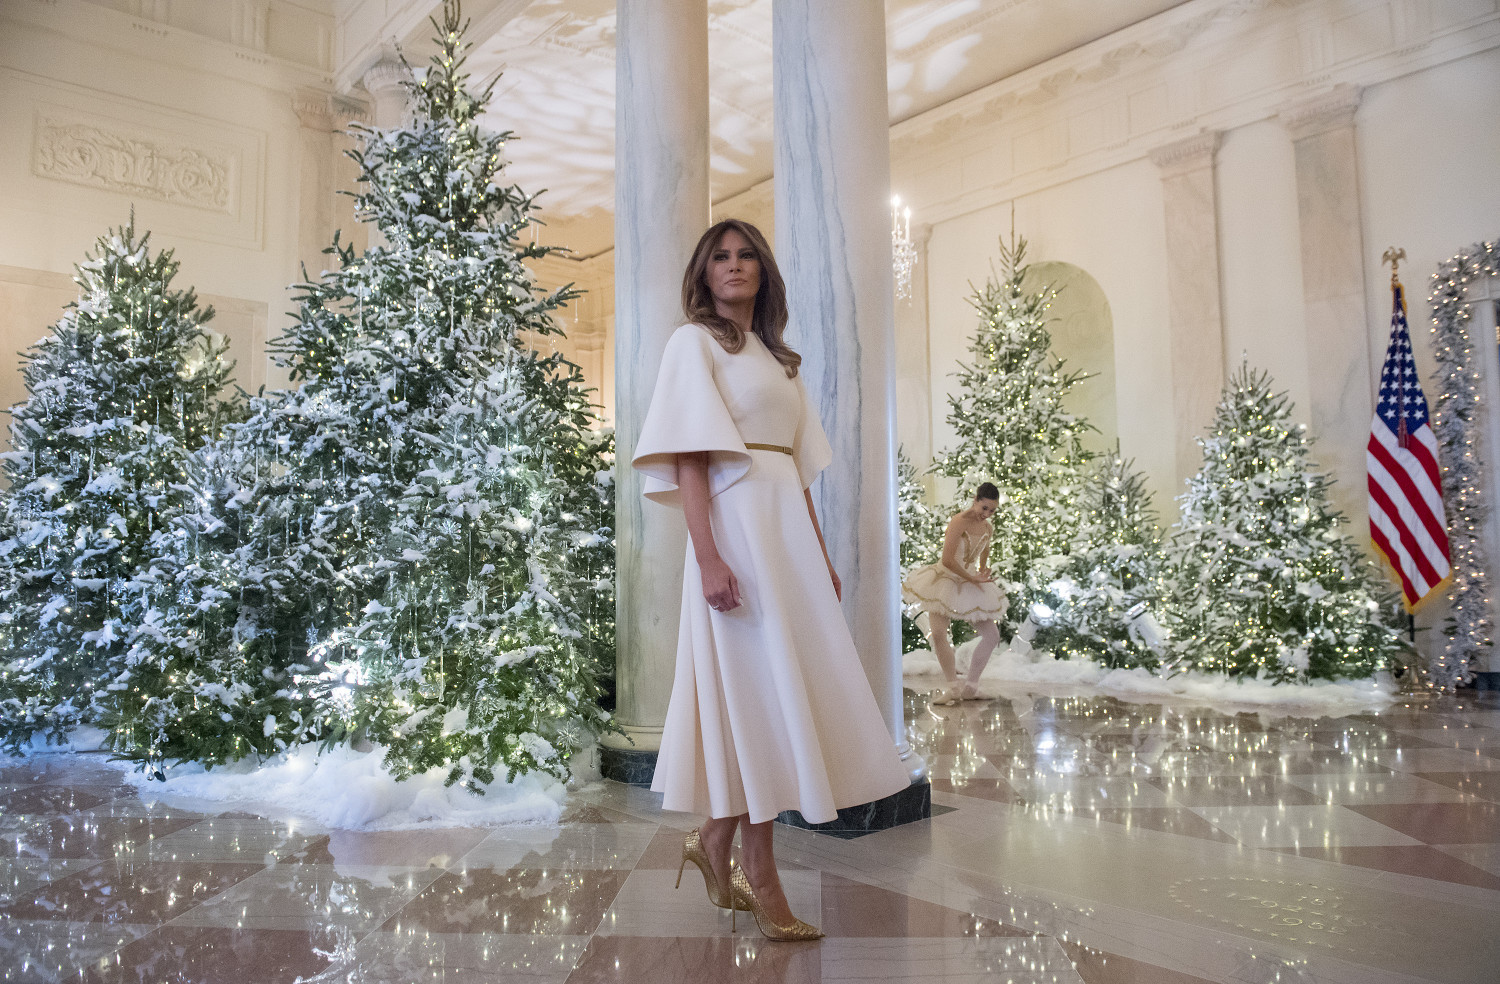 Tributes Flow to First Lady Melania Trump on Her 49th Birthday